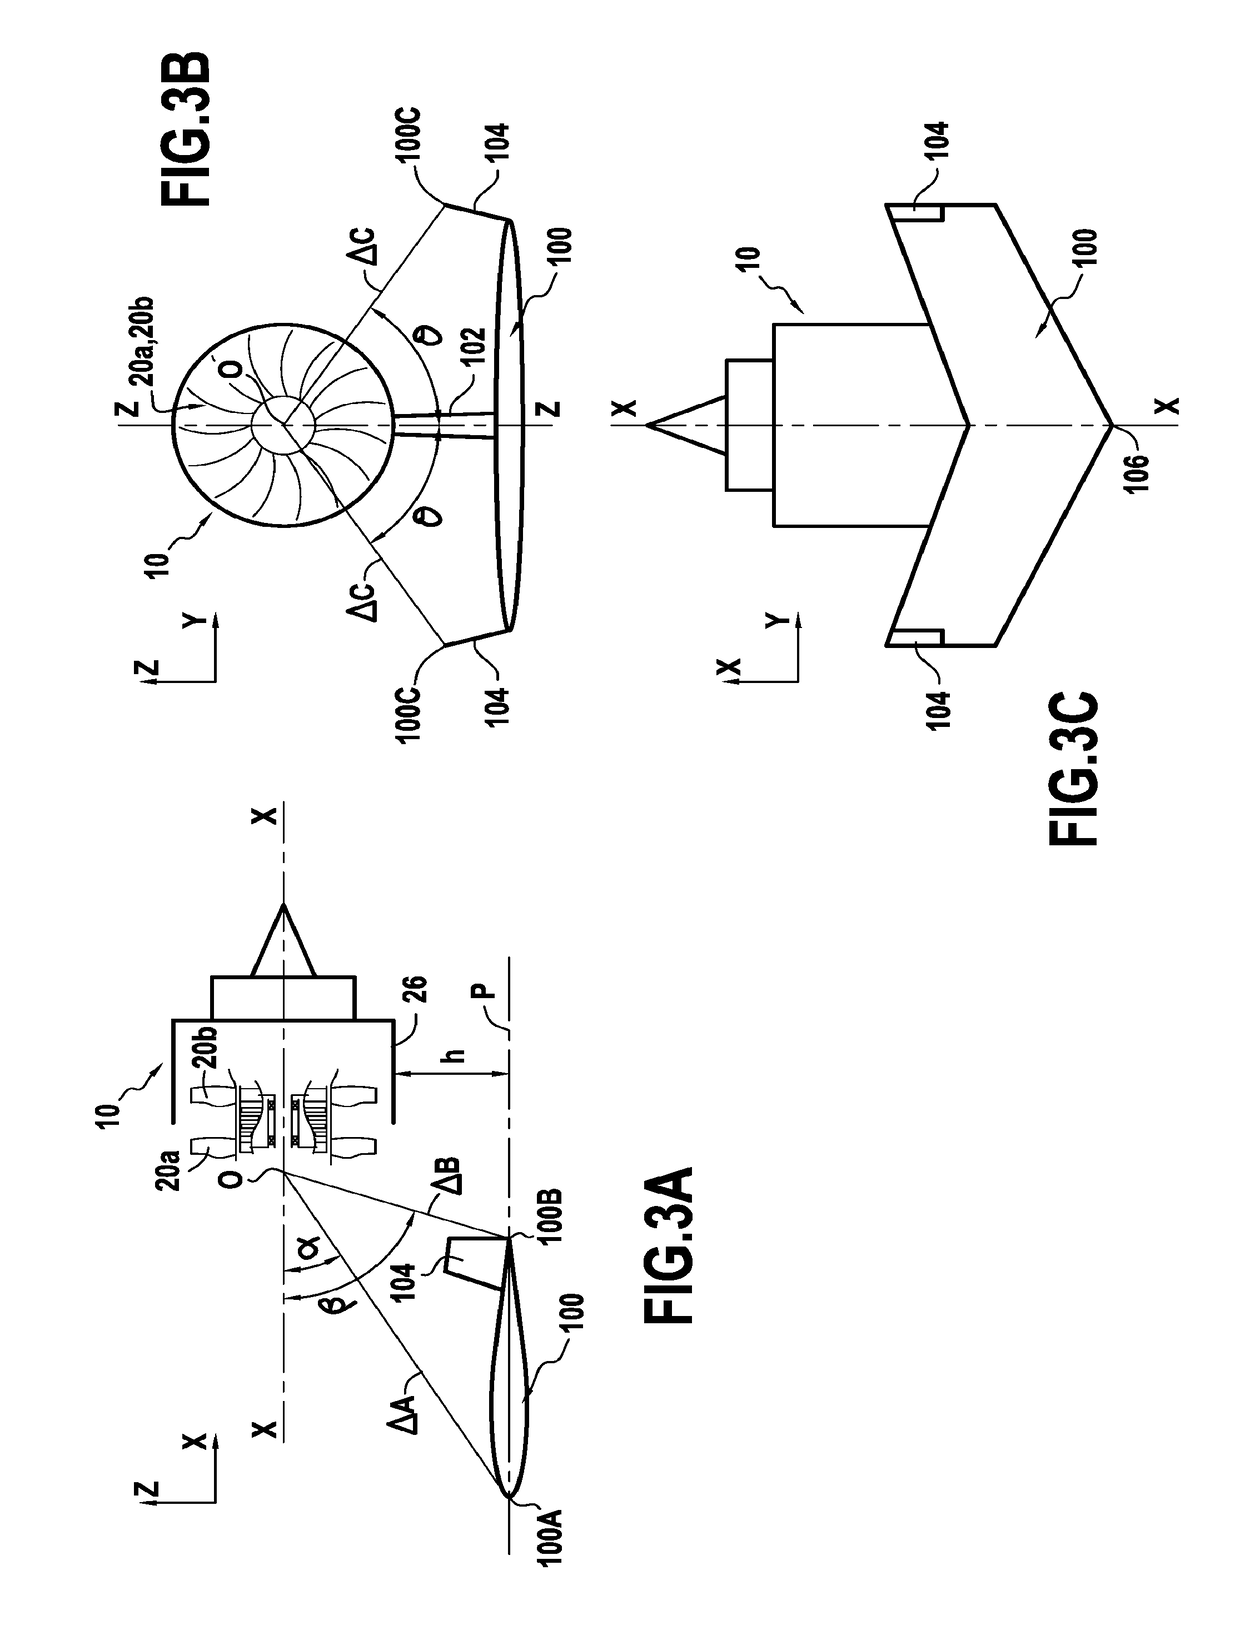 A turbine engine propelled airplane having an acoustic baffle